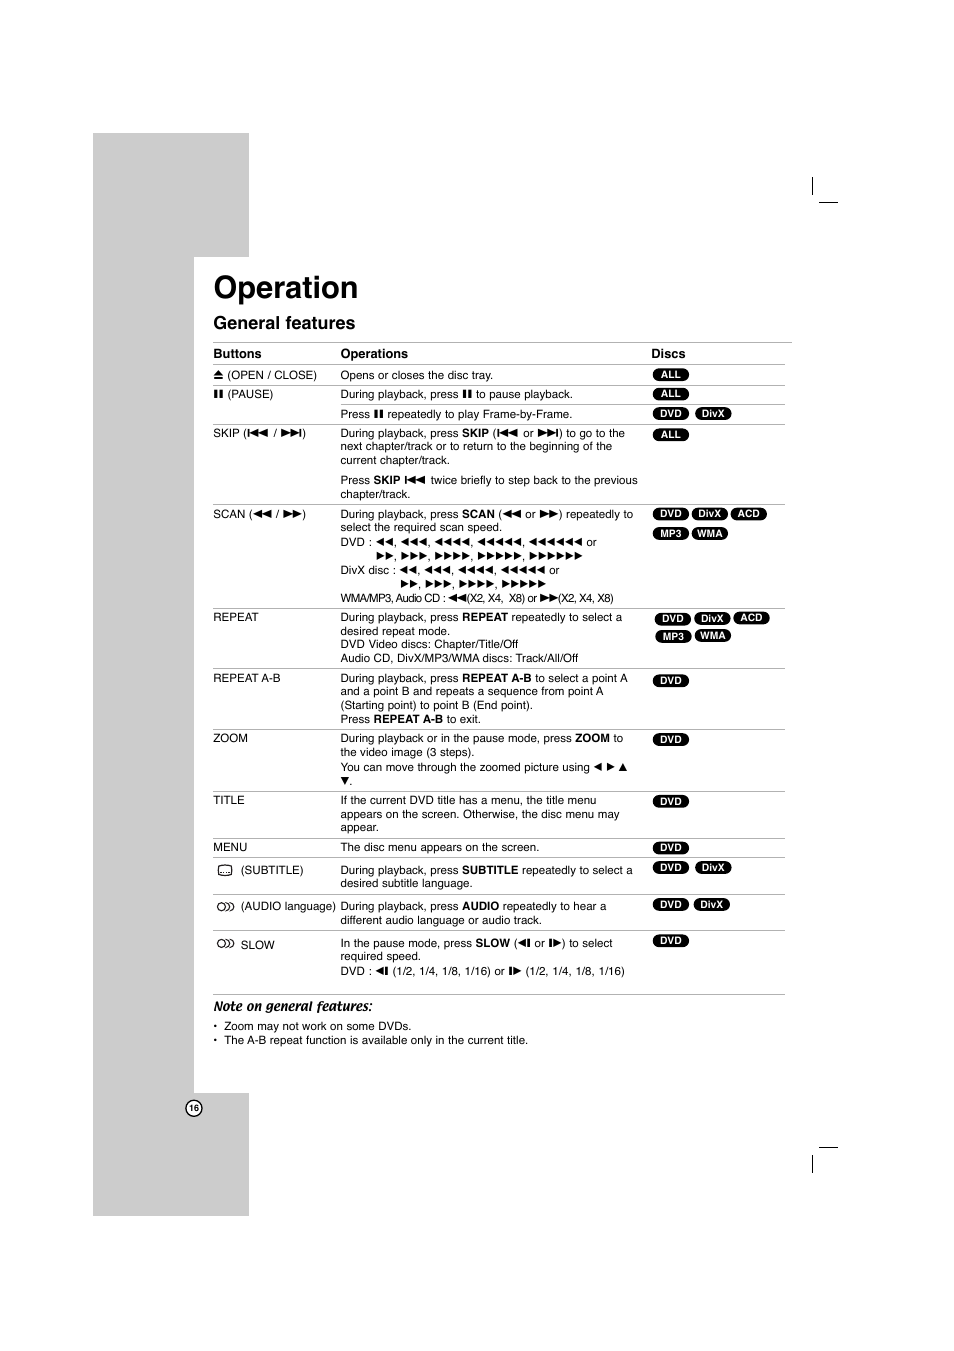 Operation, General features | LG LFD750 User Manual | Page 16 / 29